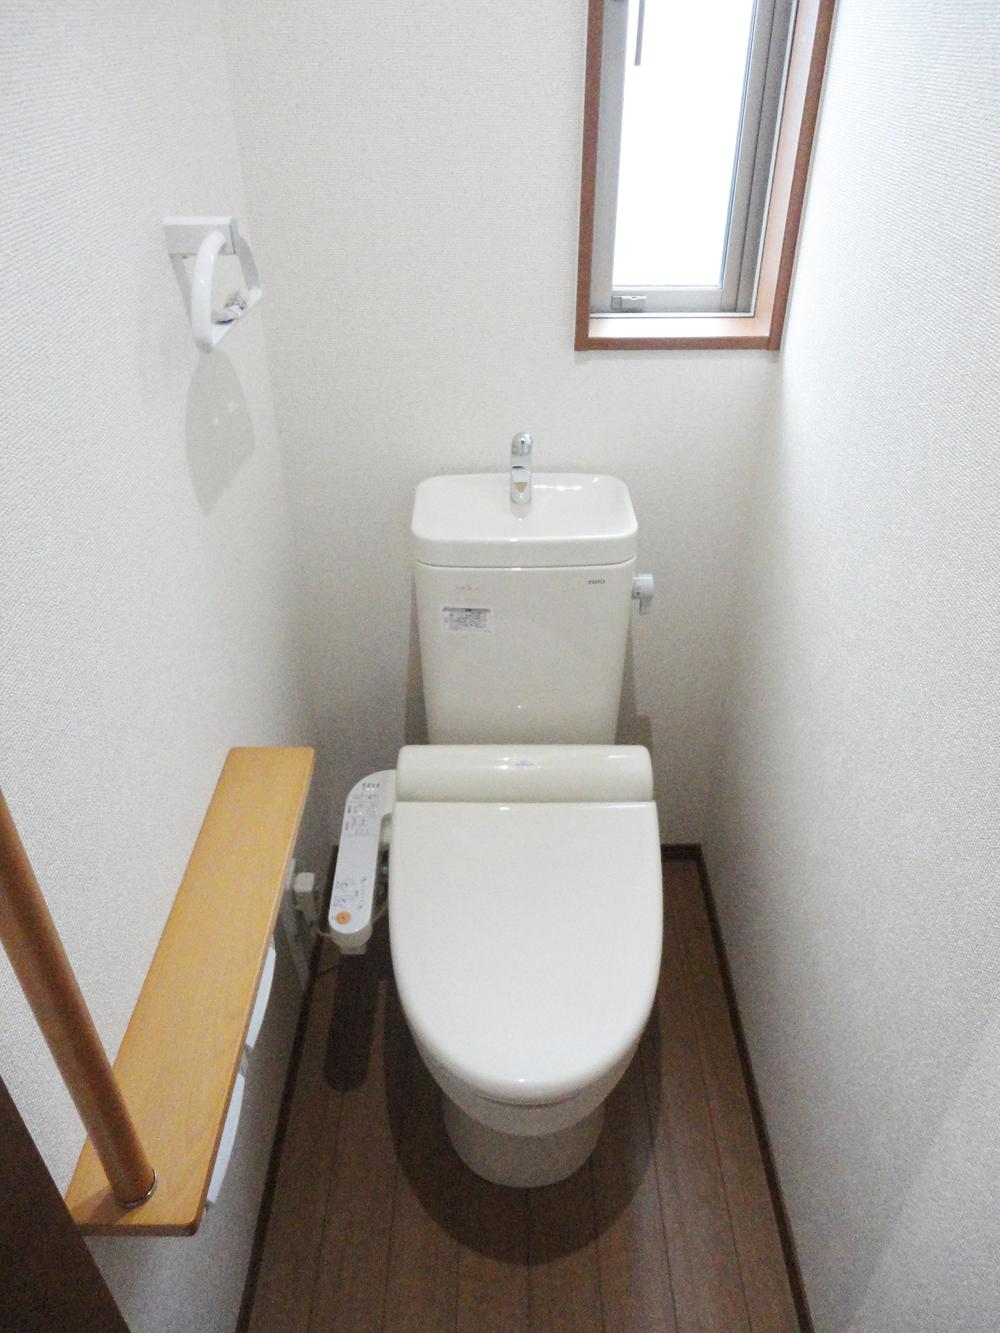 Toilet. It is the toilet of the same specification.